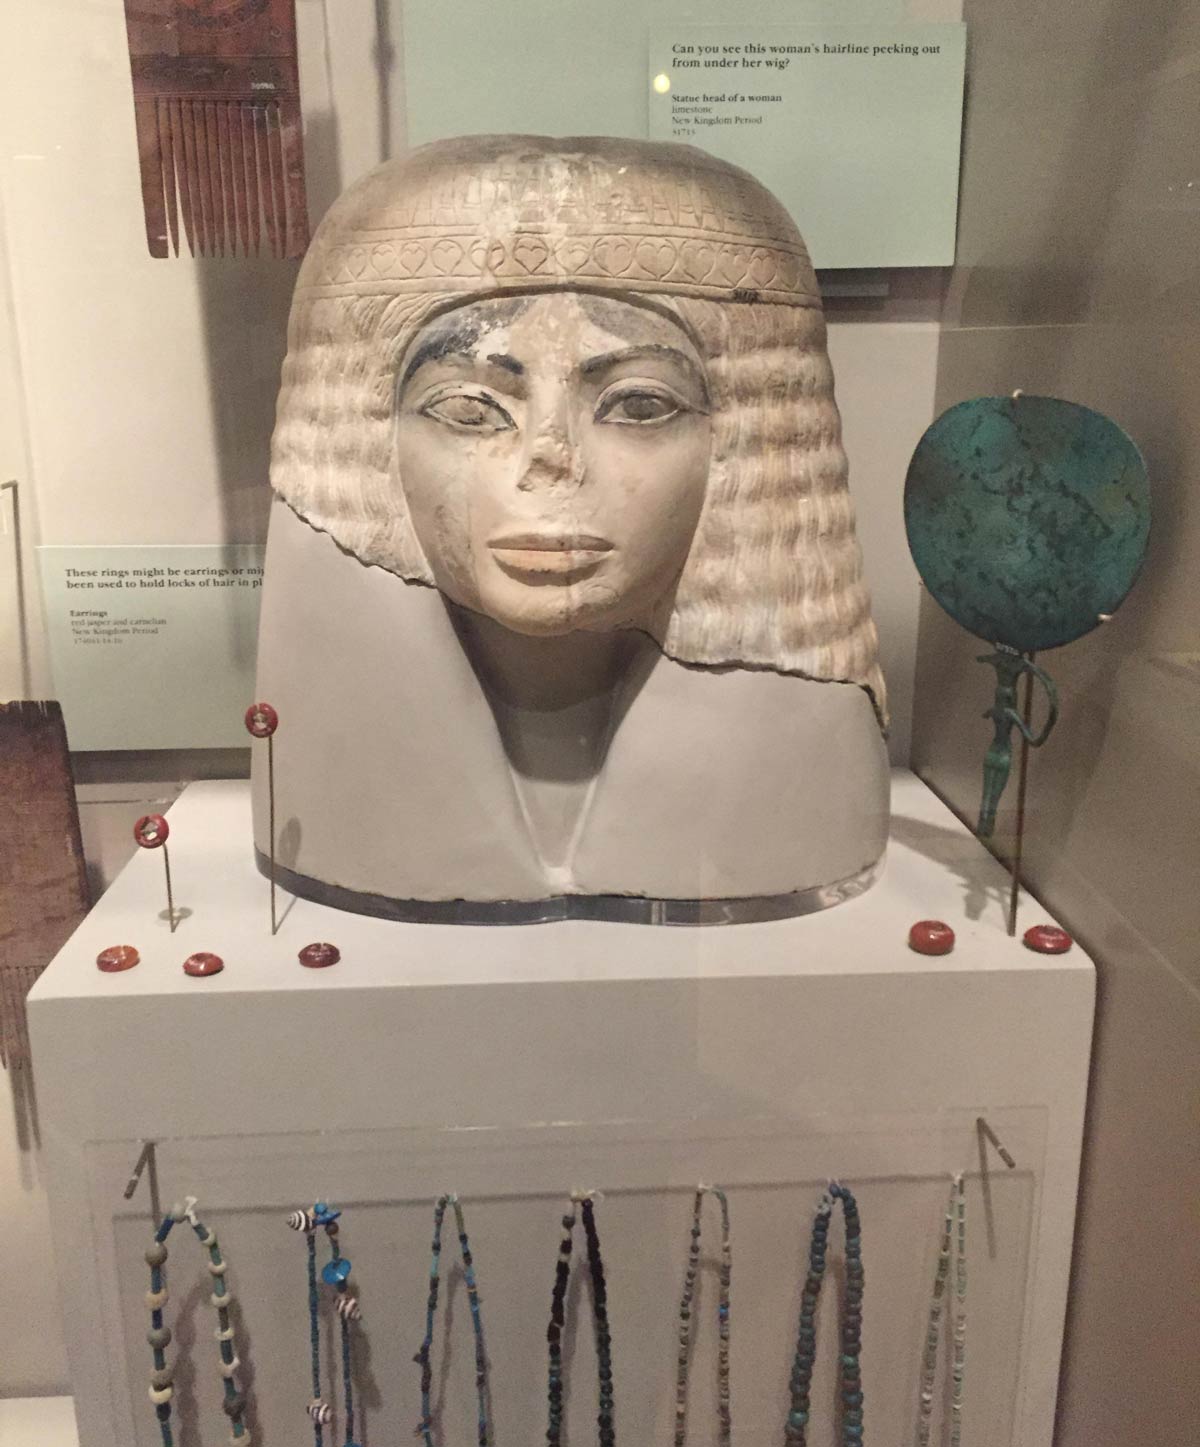 I saw Michael Jackson in the Egyptian exhibit at the Chicago field museum